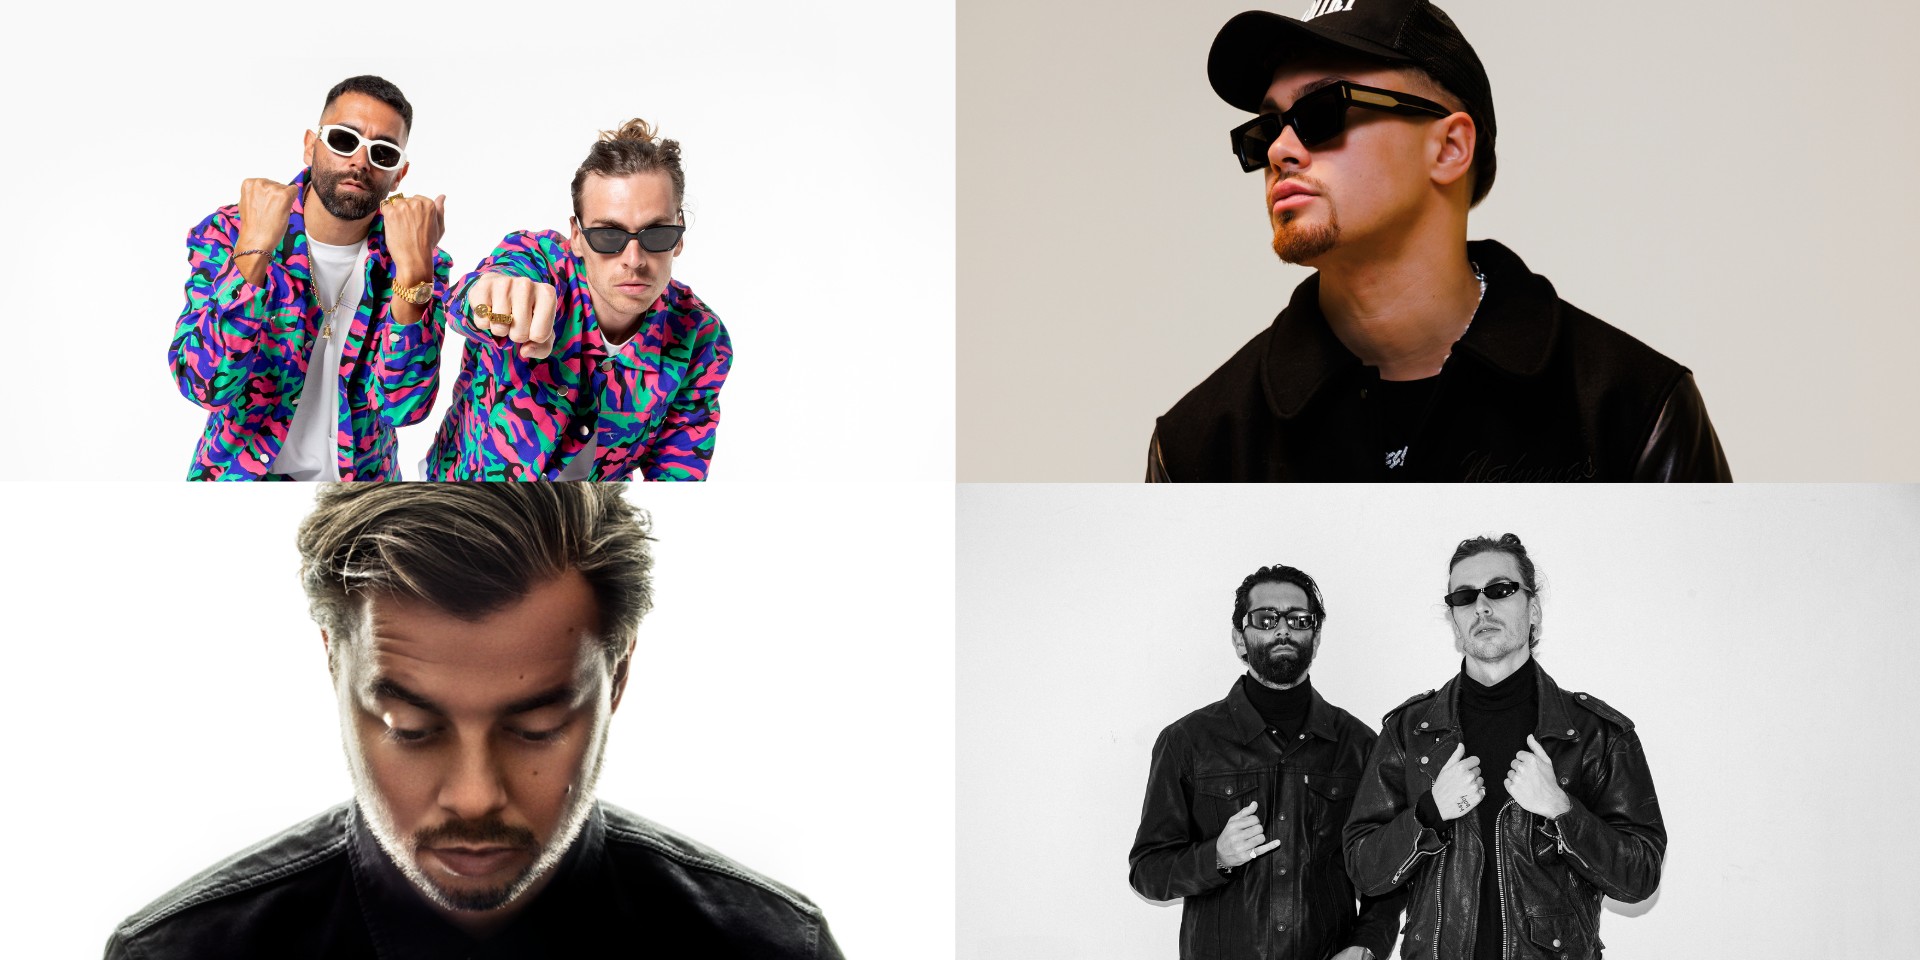 IT’S THE SHIP Korea announces first wave lineup – Yellow Claw, €URO TRA$H, ACRAZE, Quintino, and more confirmed 